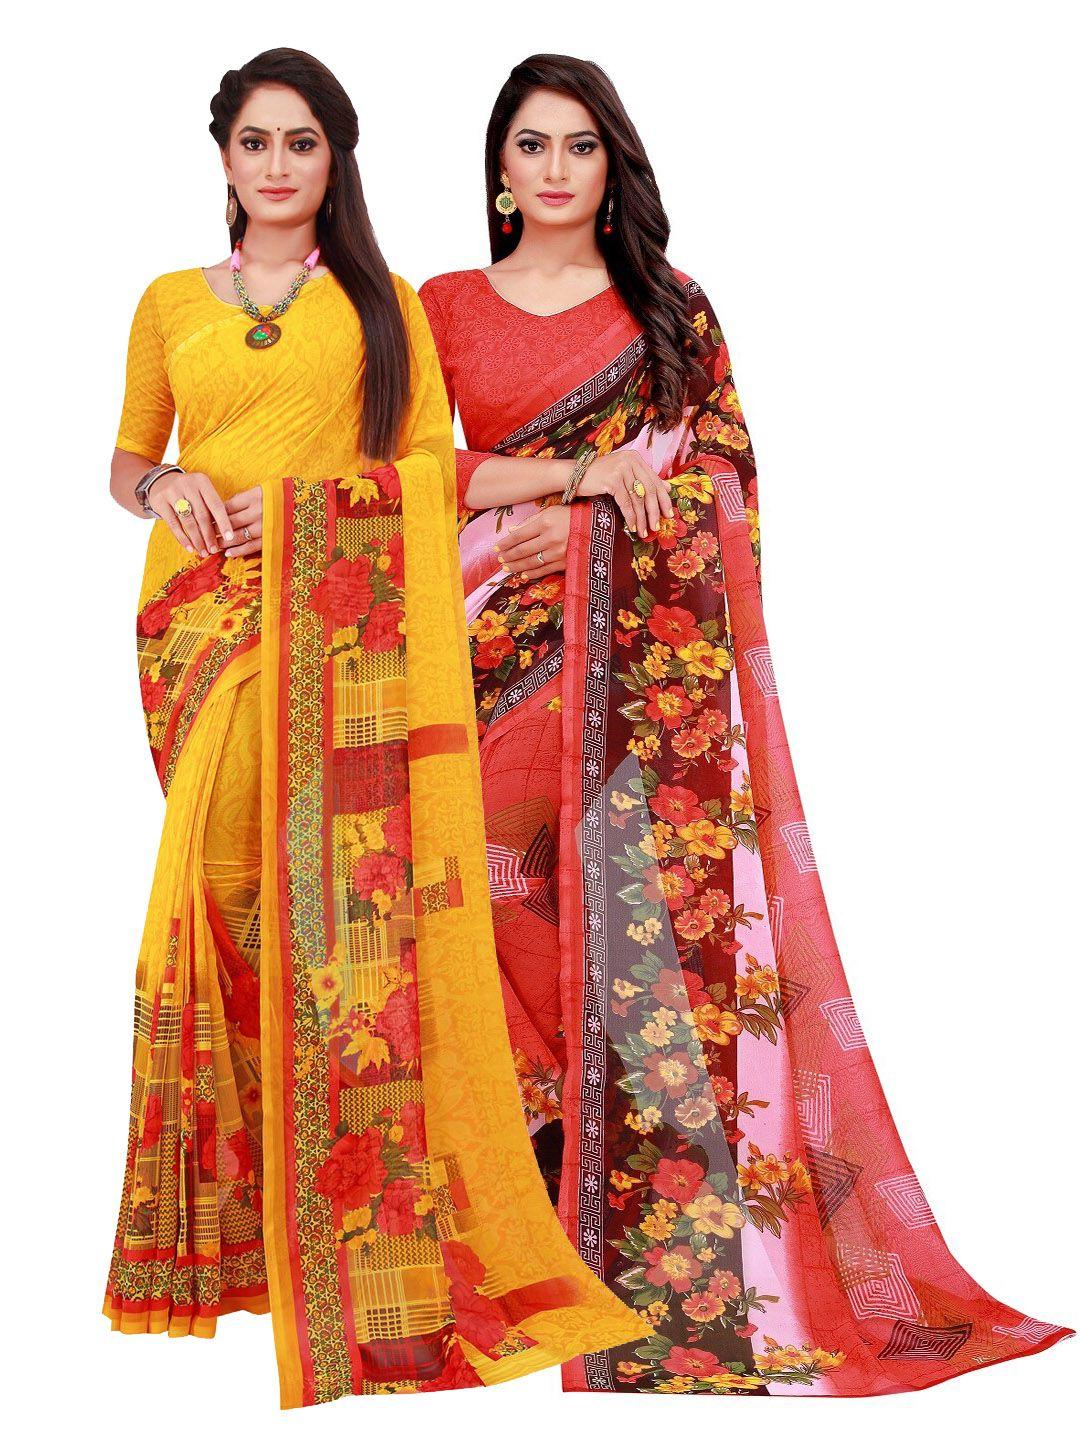 kalini-yellow-&-red-floral-printed-pure-georgette-saree-pack-of-2